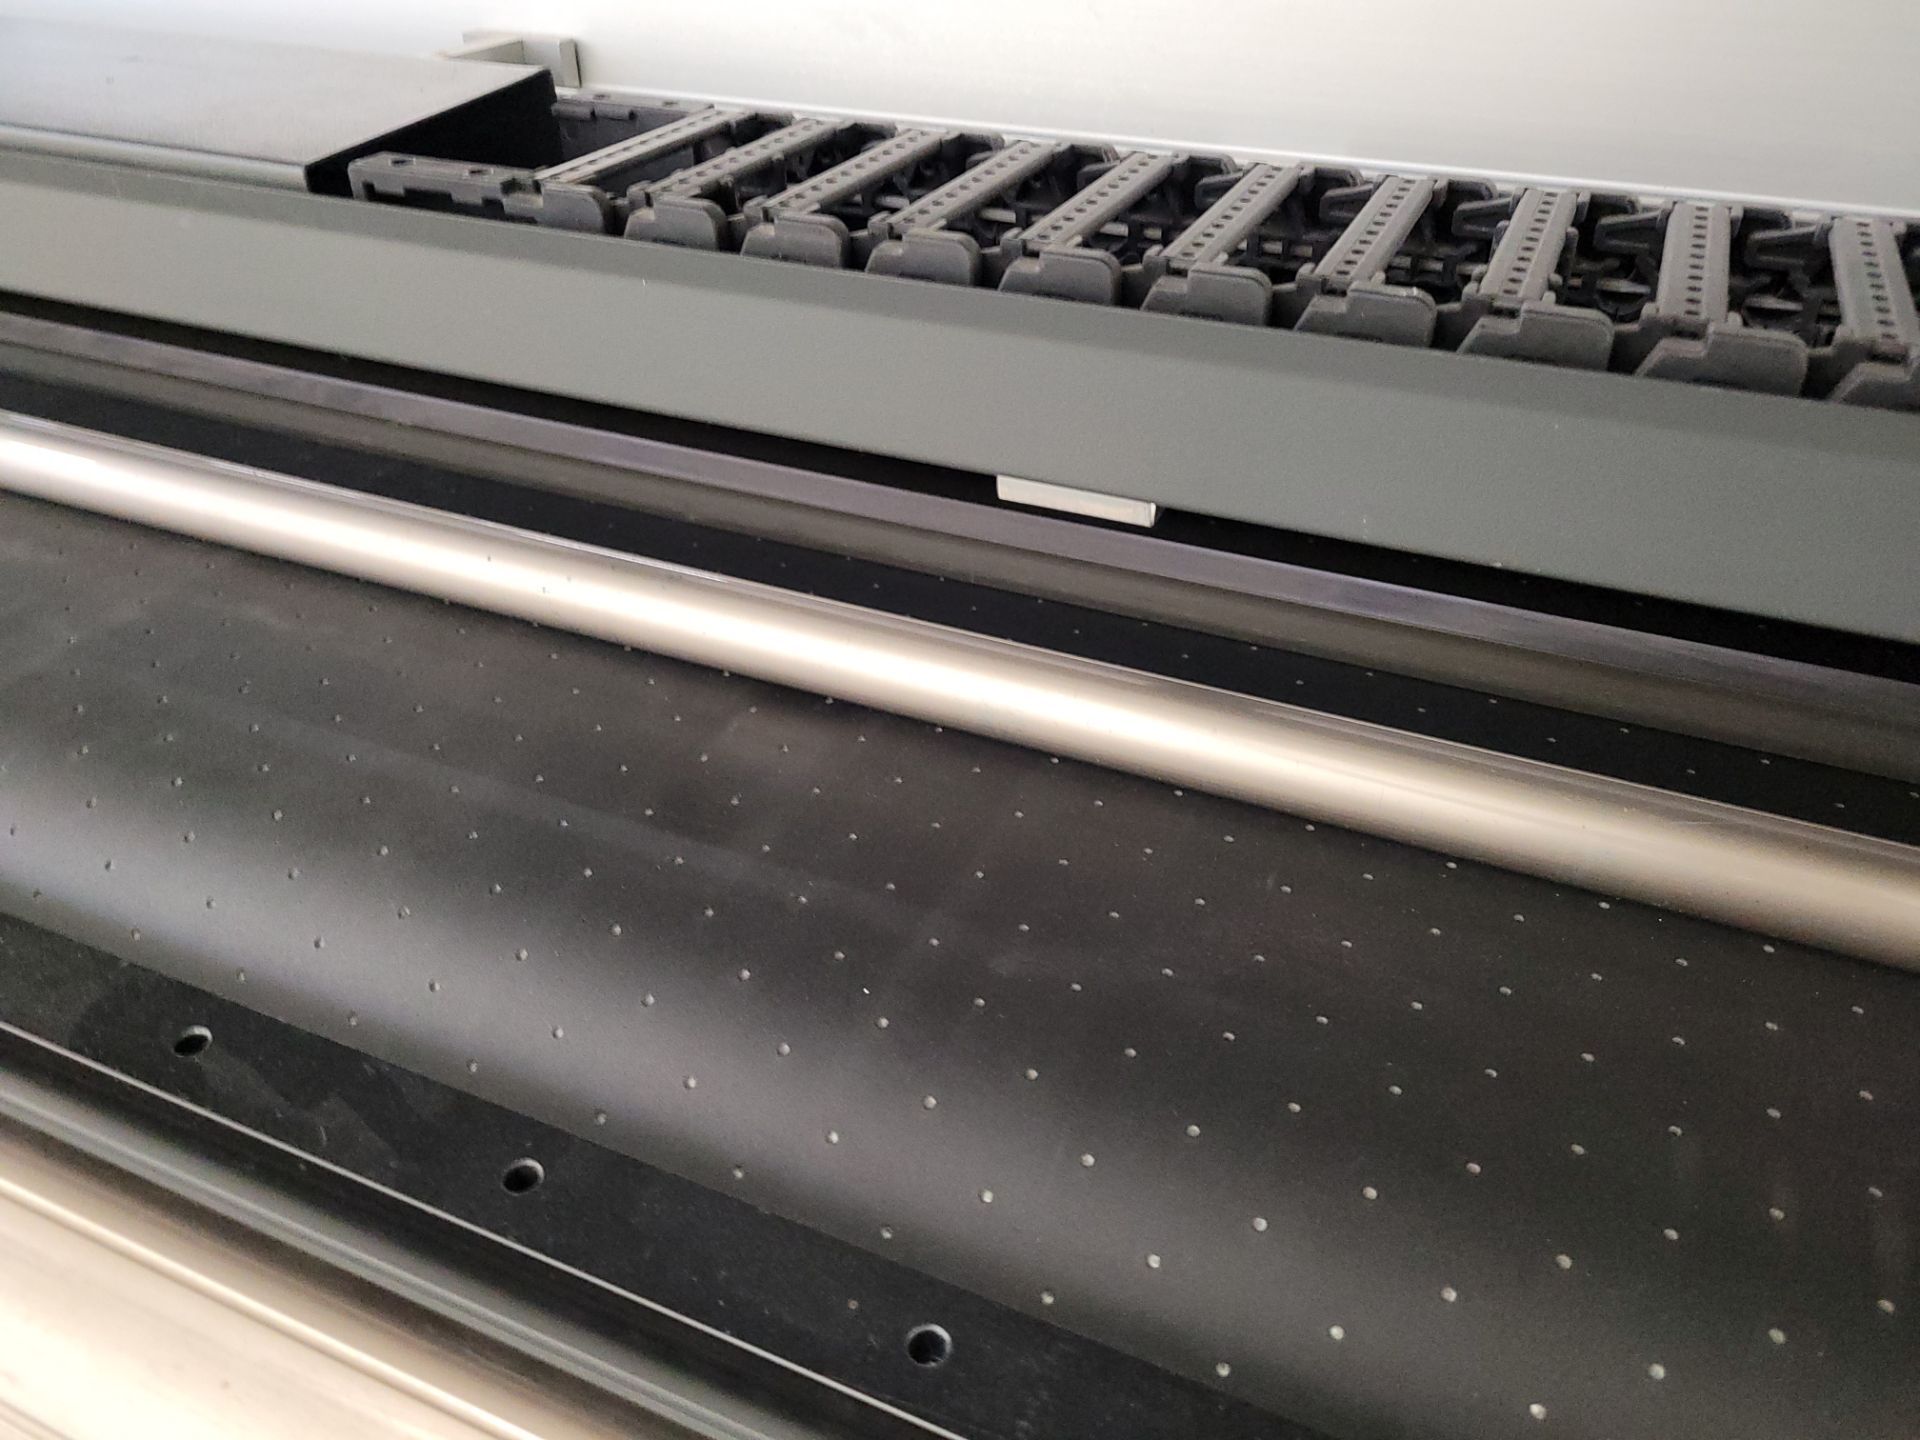 DYSS UV Printing Machine mod. Lasco & Apollo, ser. 221674RR000100264, 220V, includes conveyors and - Image 18 of 37